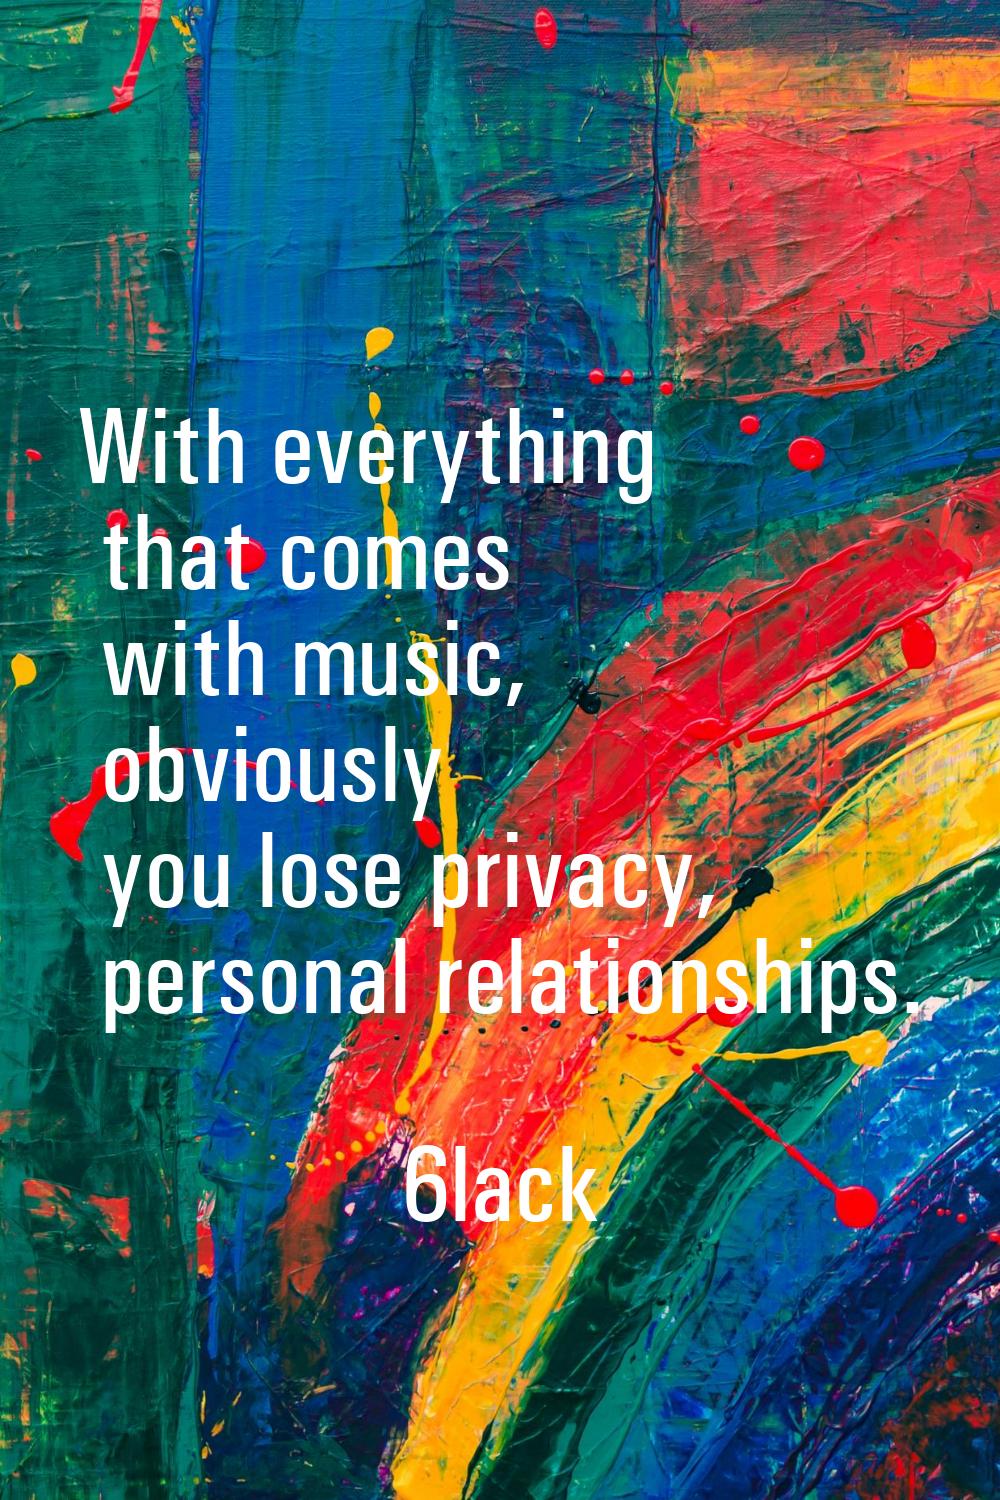 With everything that comes with music, obviously you lose privacy, personal relationships.